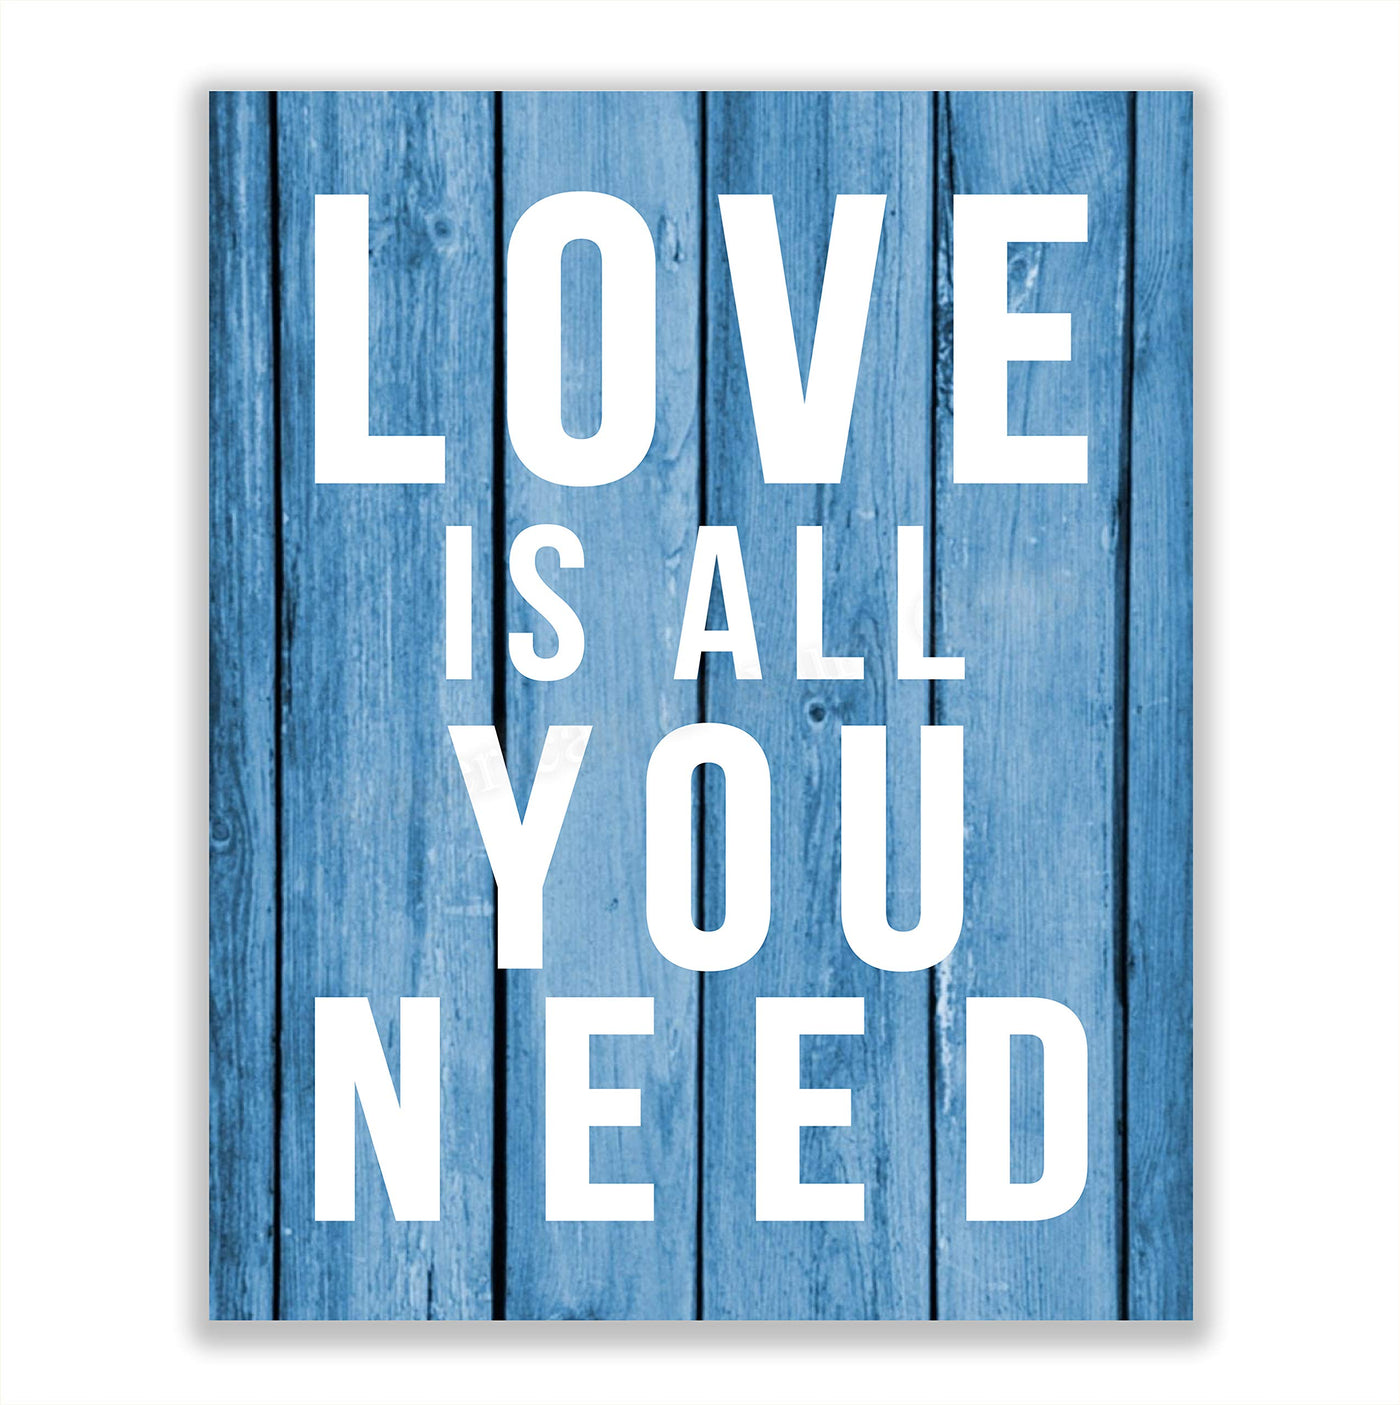 Love Is All You Need-Romantic Wall Art Sign-8 x 10" Inspirational Typographic Wall Print-Ready to Frame. Home-Office-Bedroom-Dorm Decor. Simple, Heartfelt Gift & Reminder-All You Need Is Love!